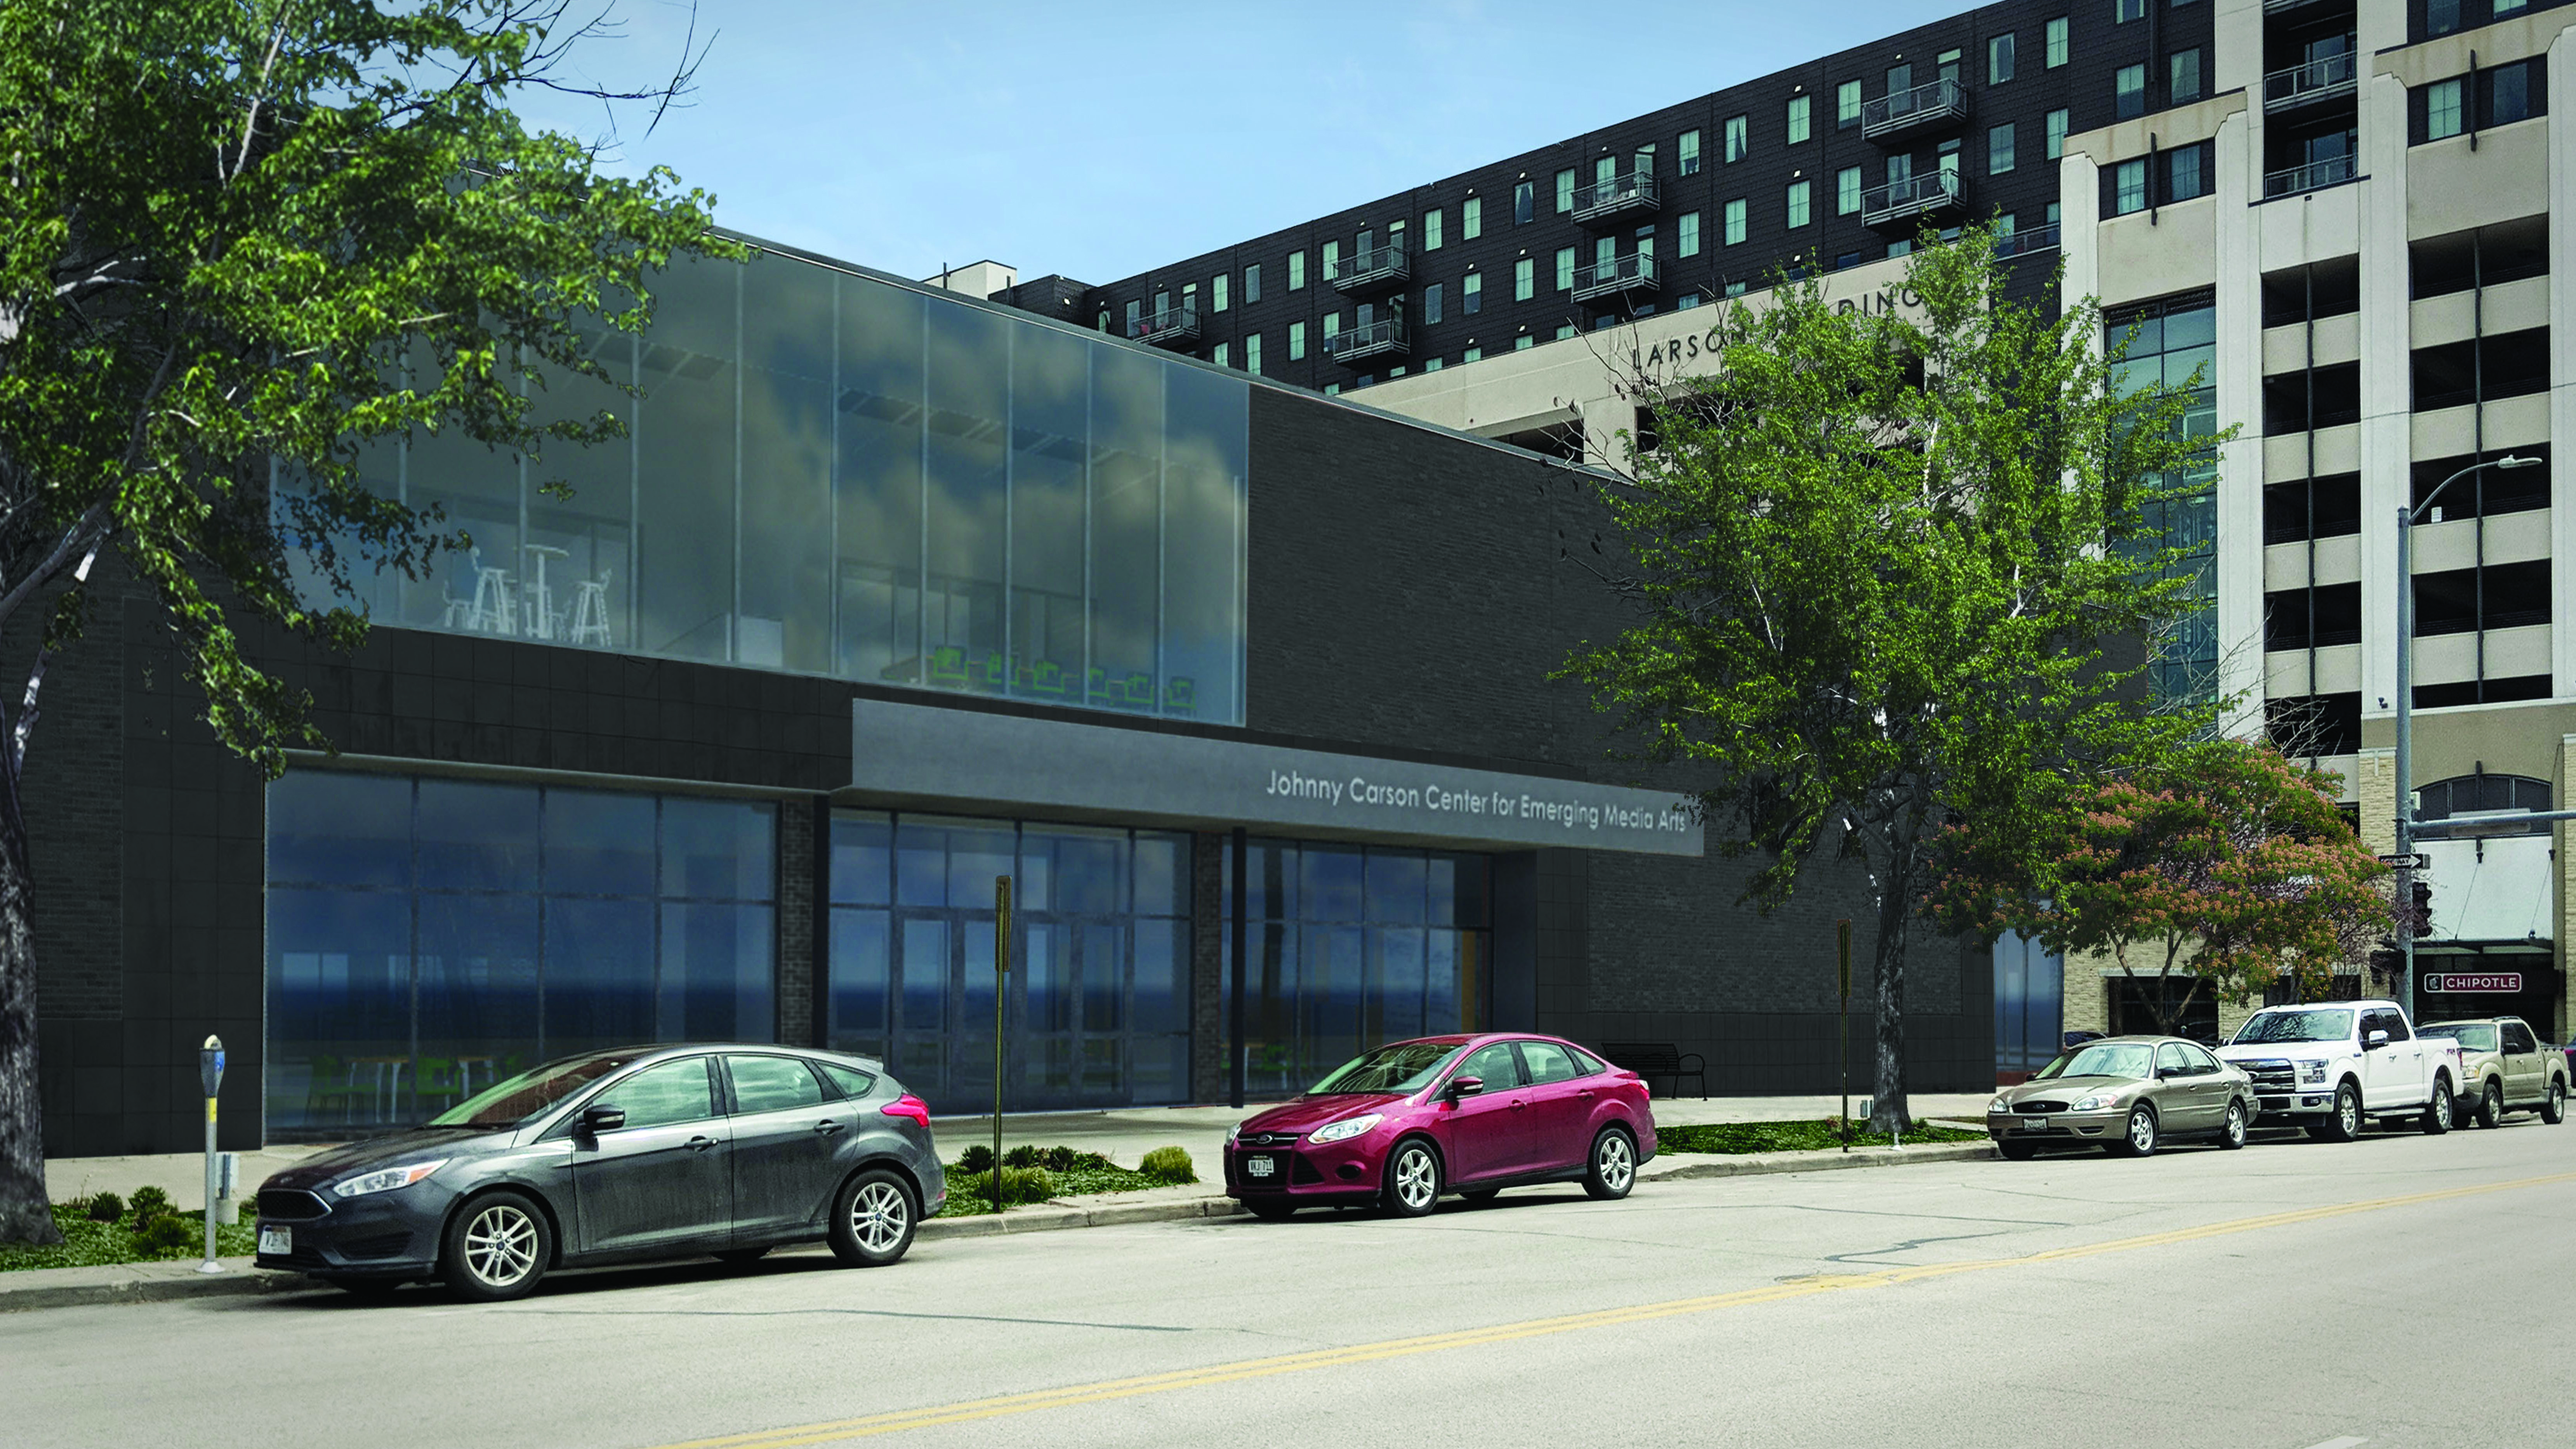 's rendering of the Johnny Carson Center for Emerging Media Arts shows how the exterior of the building will look when it opens in August 2019. The building is located at 1300 Q St., formerly the Nebraska Bookstore. Courtesy of HDR.